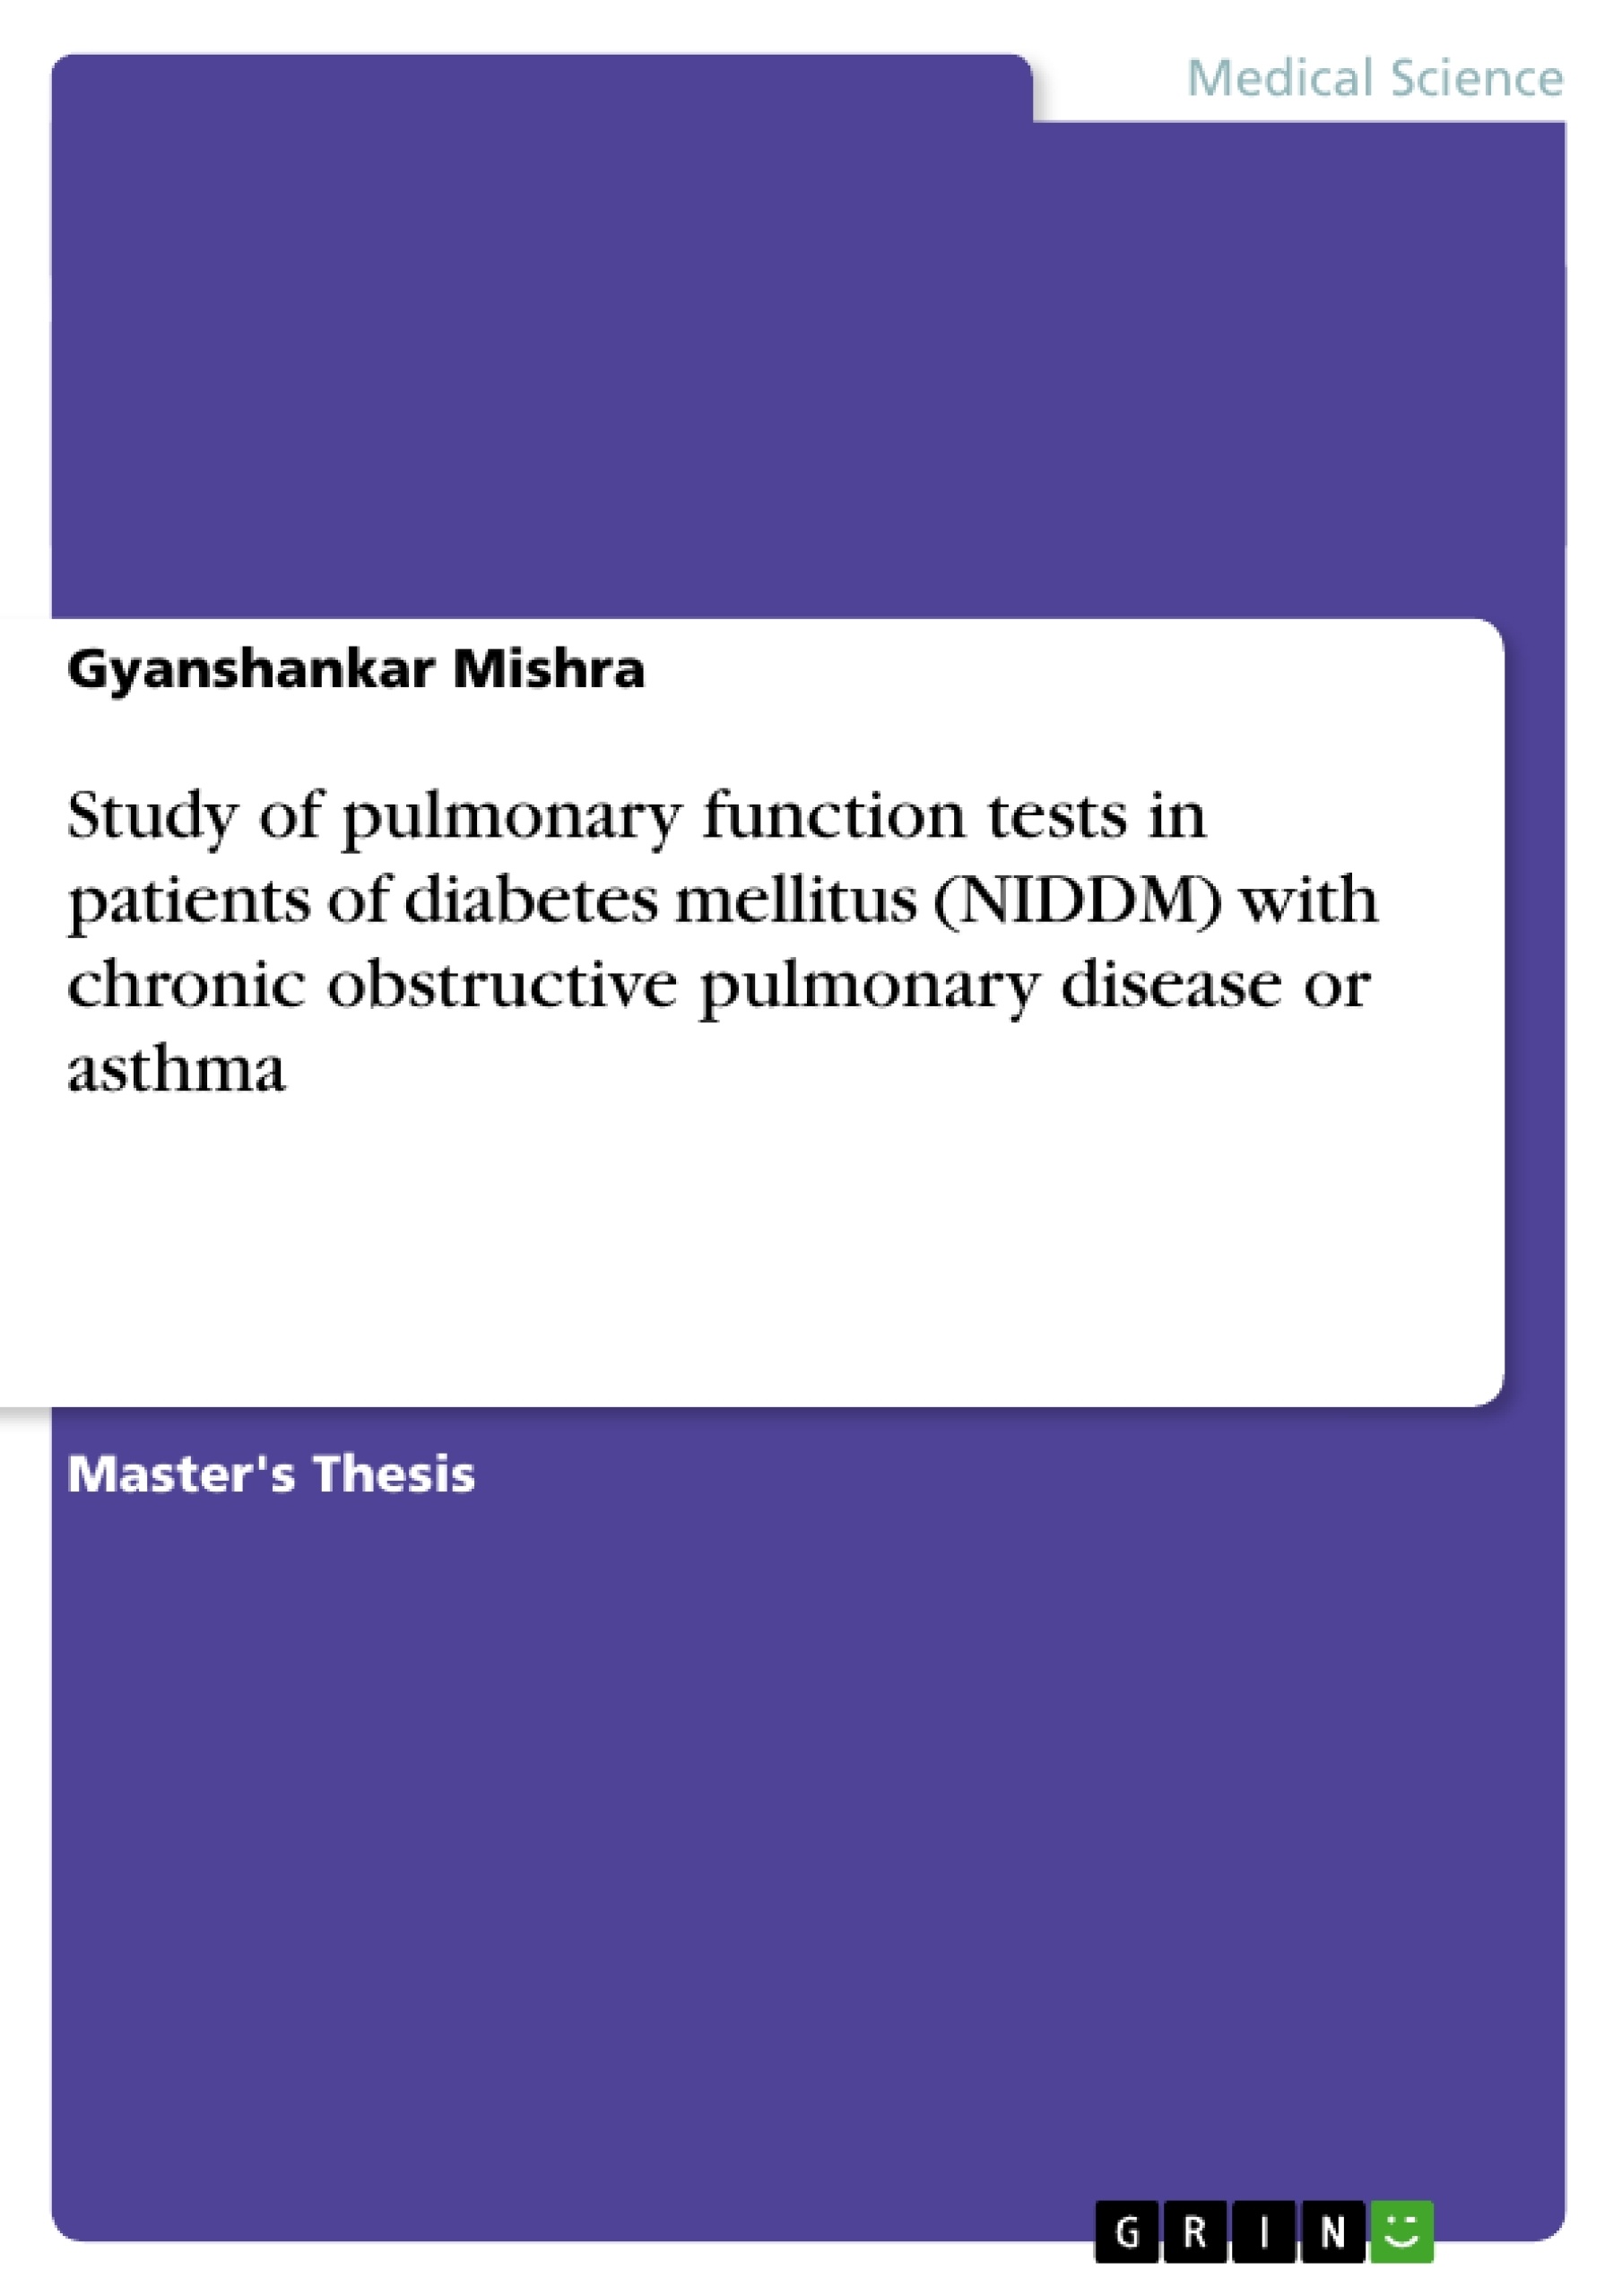 Título: Study of pulmonary function tests in patients of diabetes mellitus (NIDDM) with chronic obstructive pulmonary disease or asthma